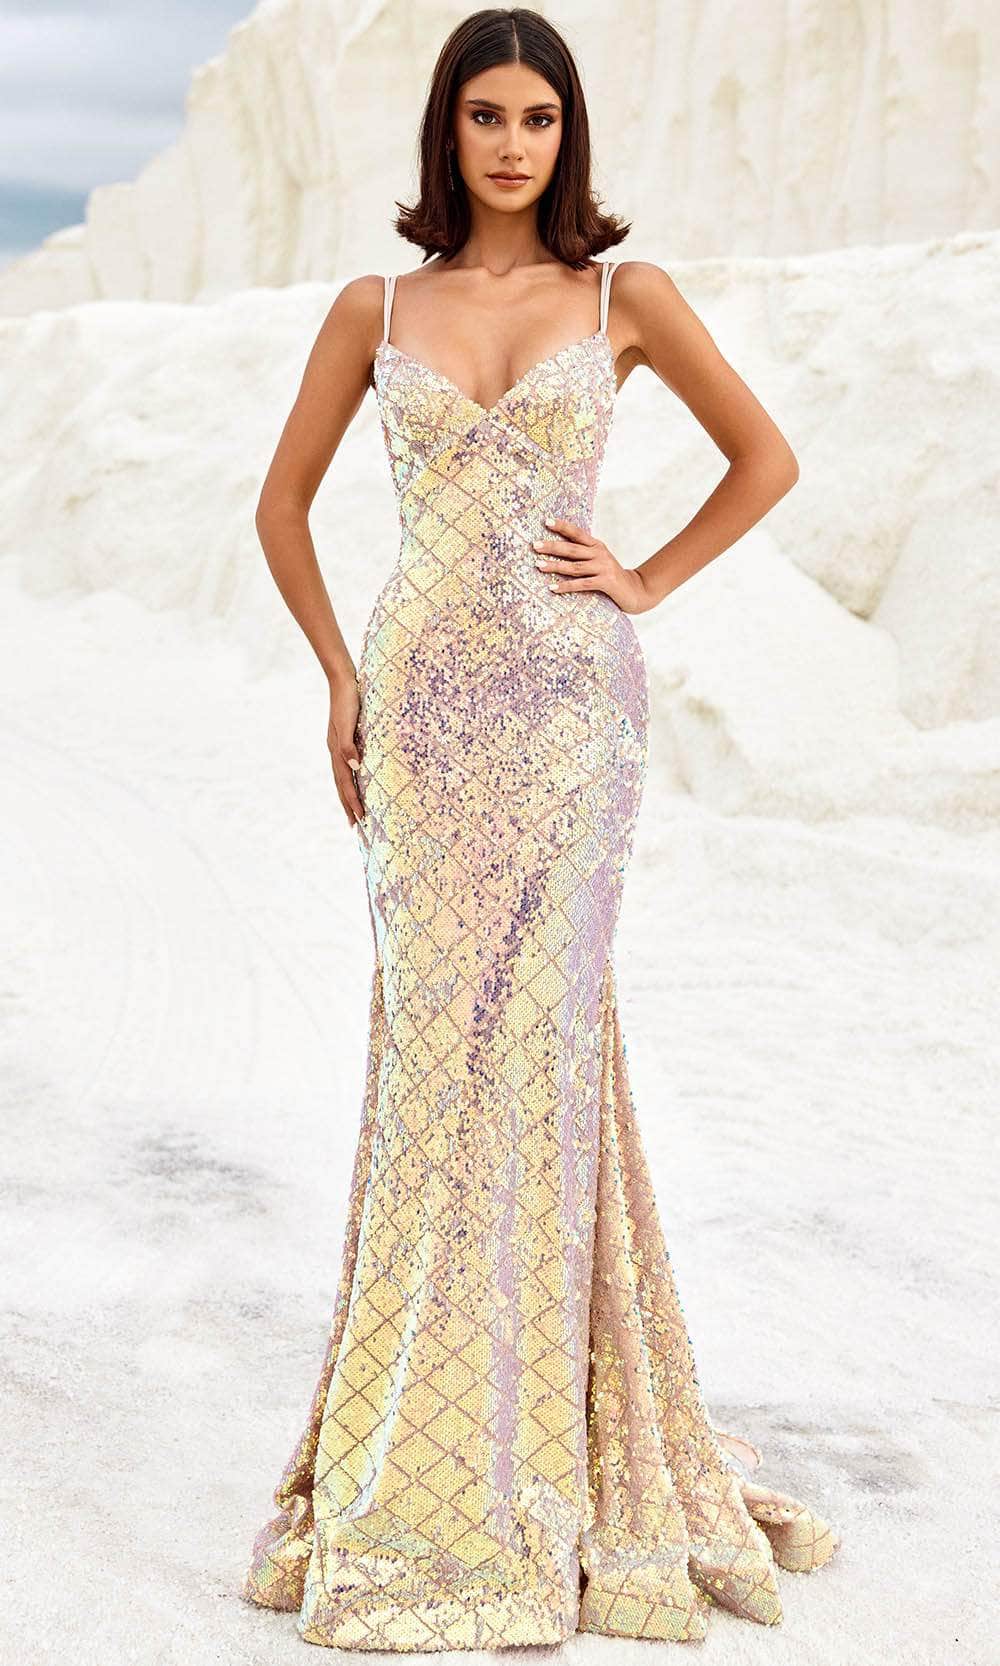 Image of Blush by Alexia Designs 12125 - V-Neck Iridescent Sequin Prom Gown